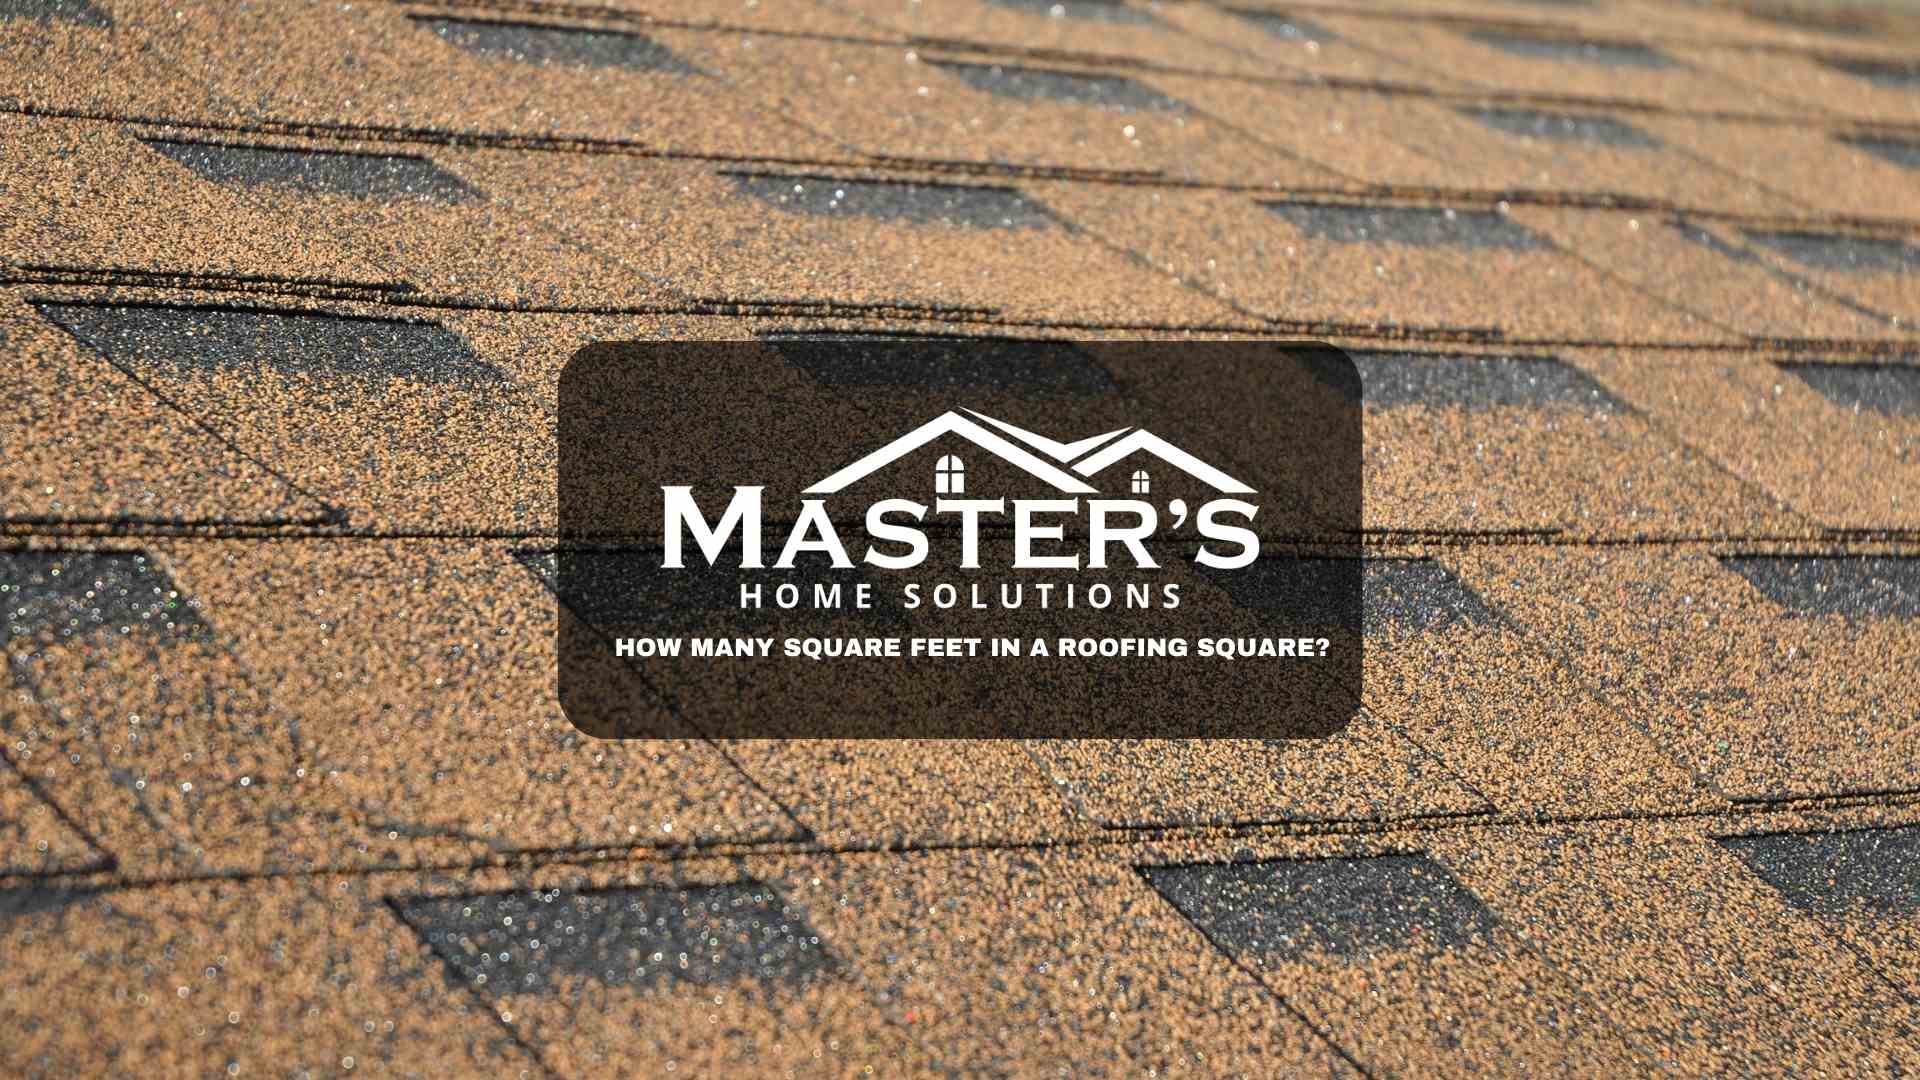 How Many Square Feet in a Roofing Square?